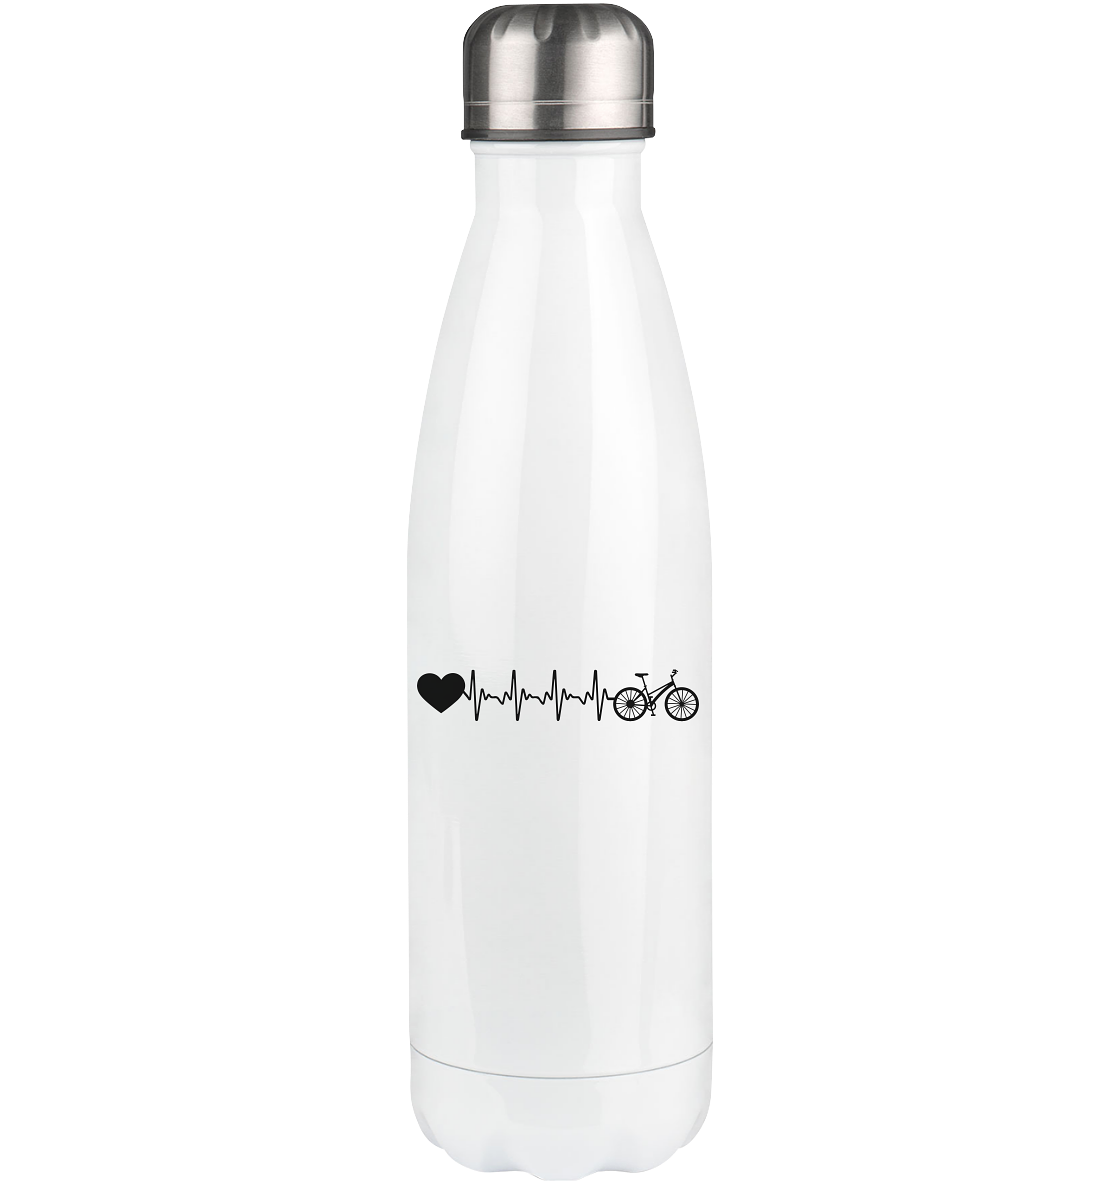 Heartbeat Heart and Bicycle - Edelstahl Thermosflasche fahrrad 500ml